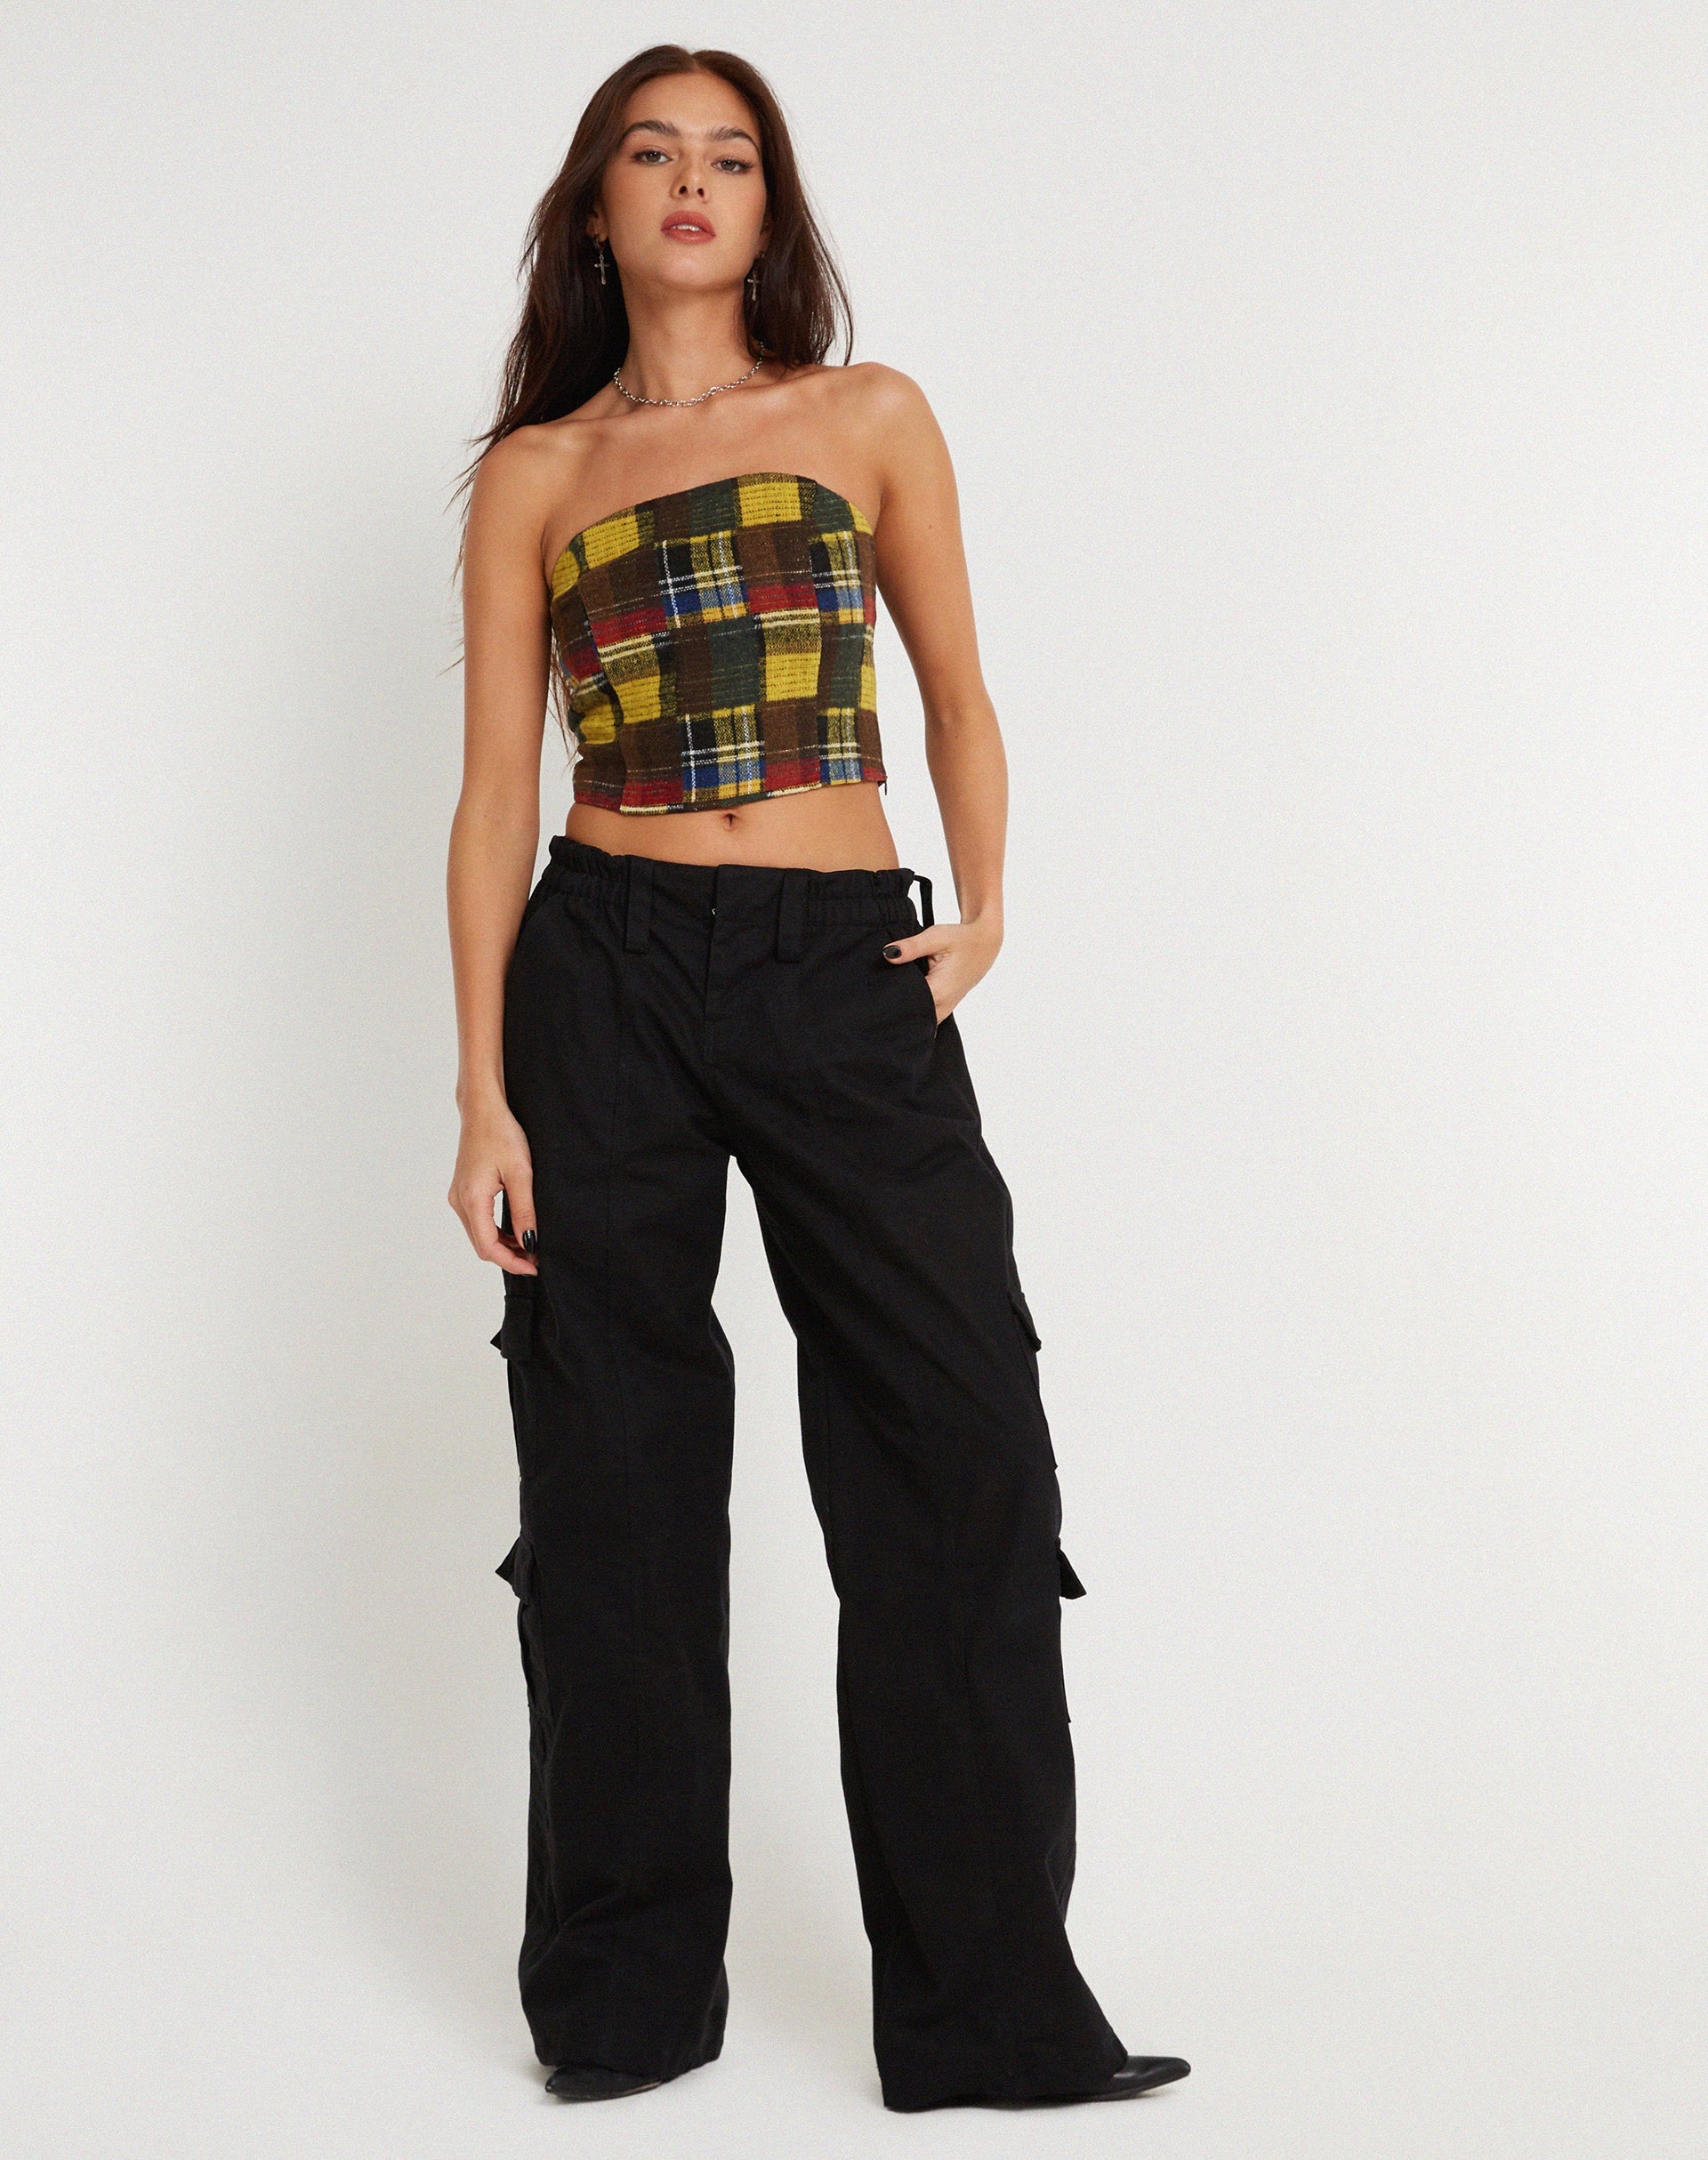 Image of Delny Bandeau Top in Mix Tartans